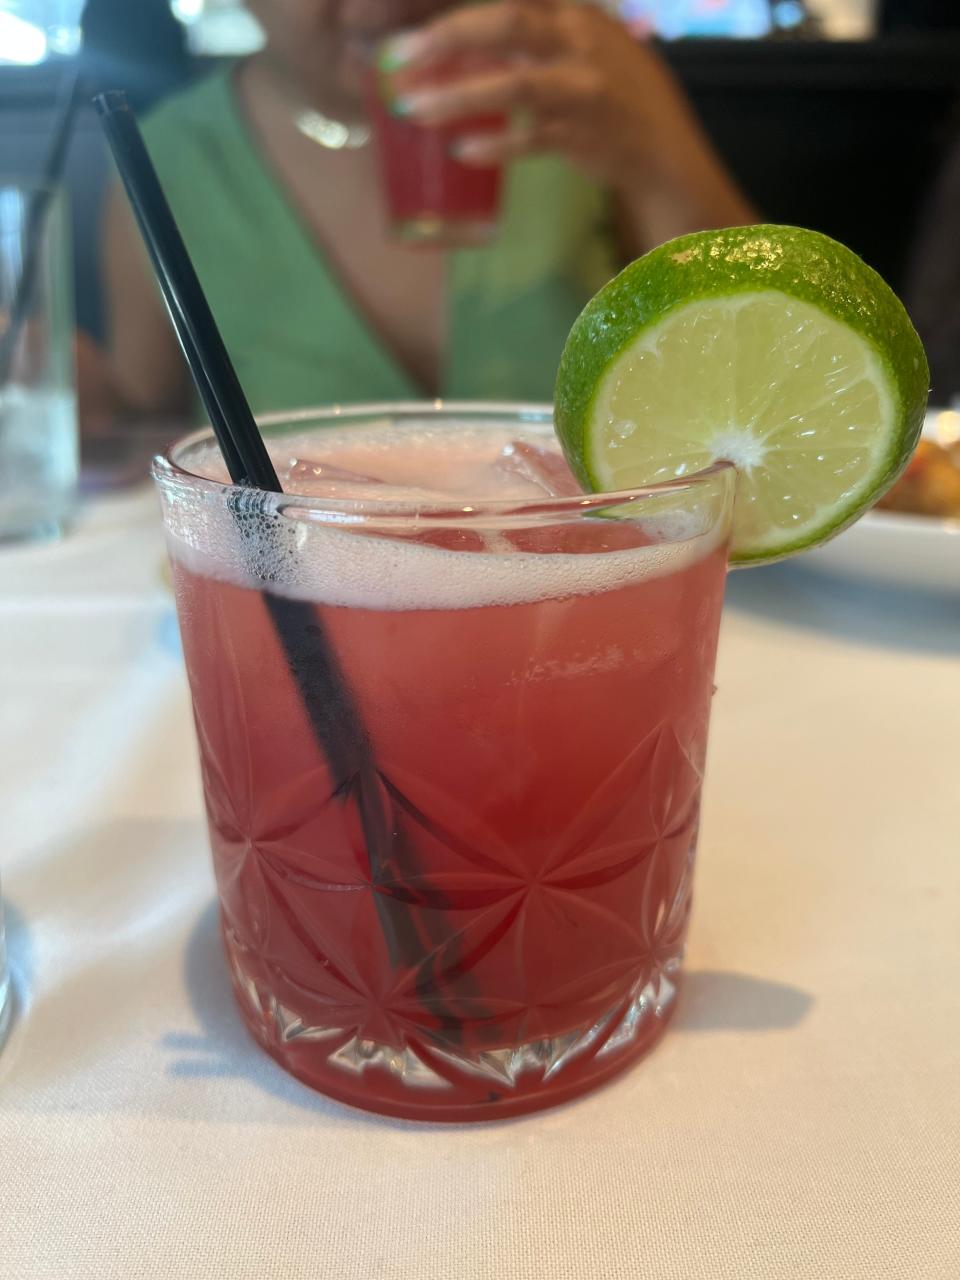 Close-up of a refreshing drink with a lime slice, served on a table with a person in the background